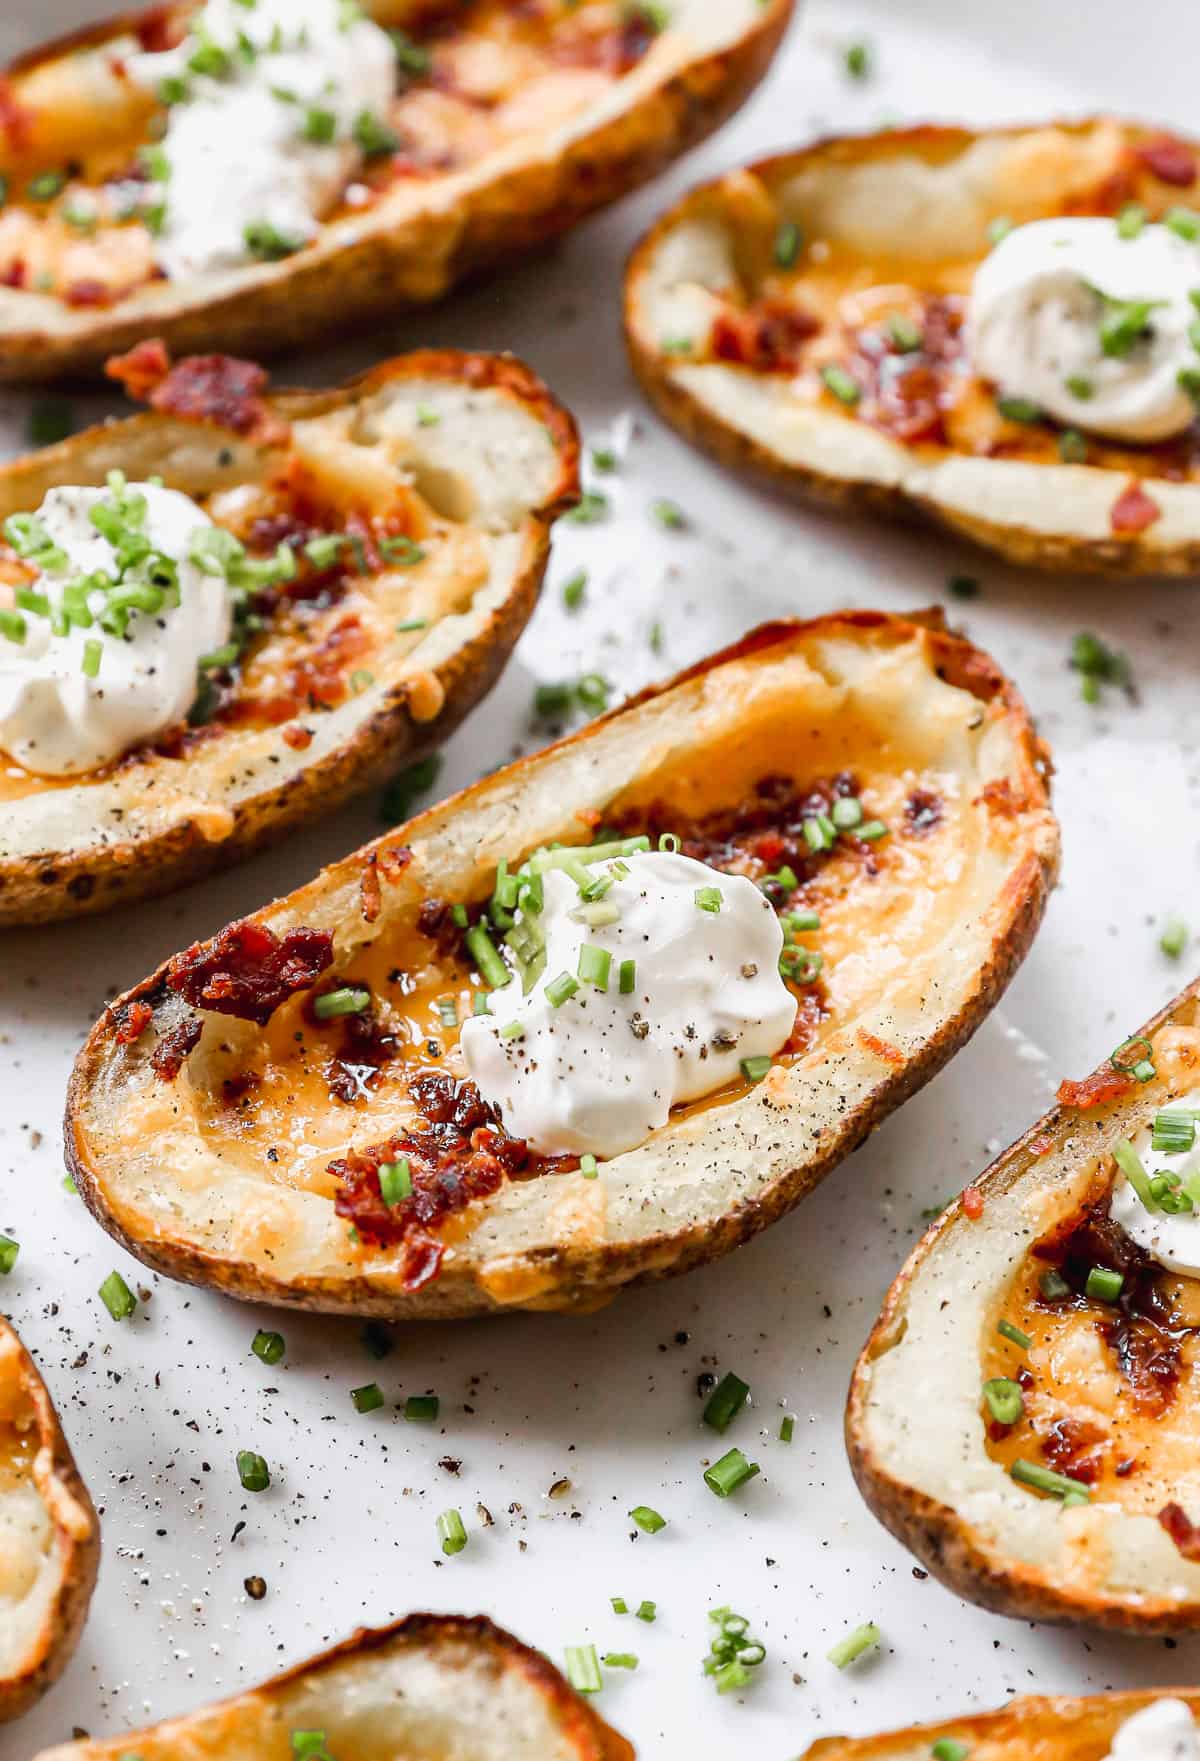 Potato halves filled with chopped bacon, sour cream and chives.